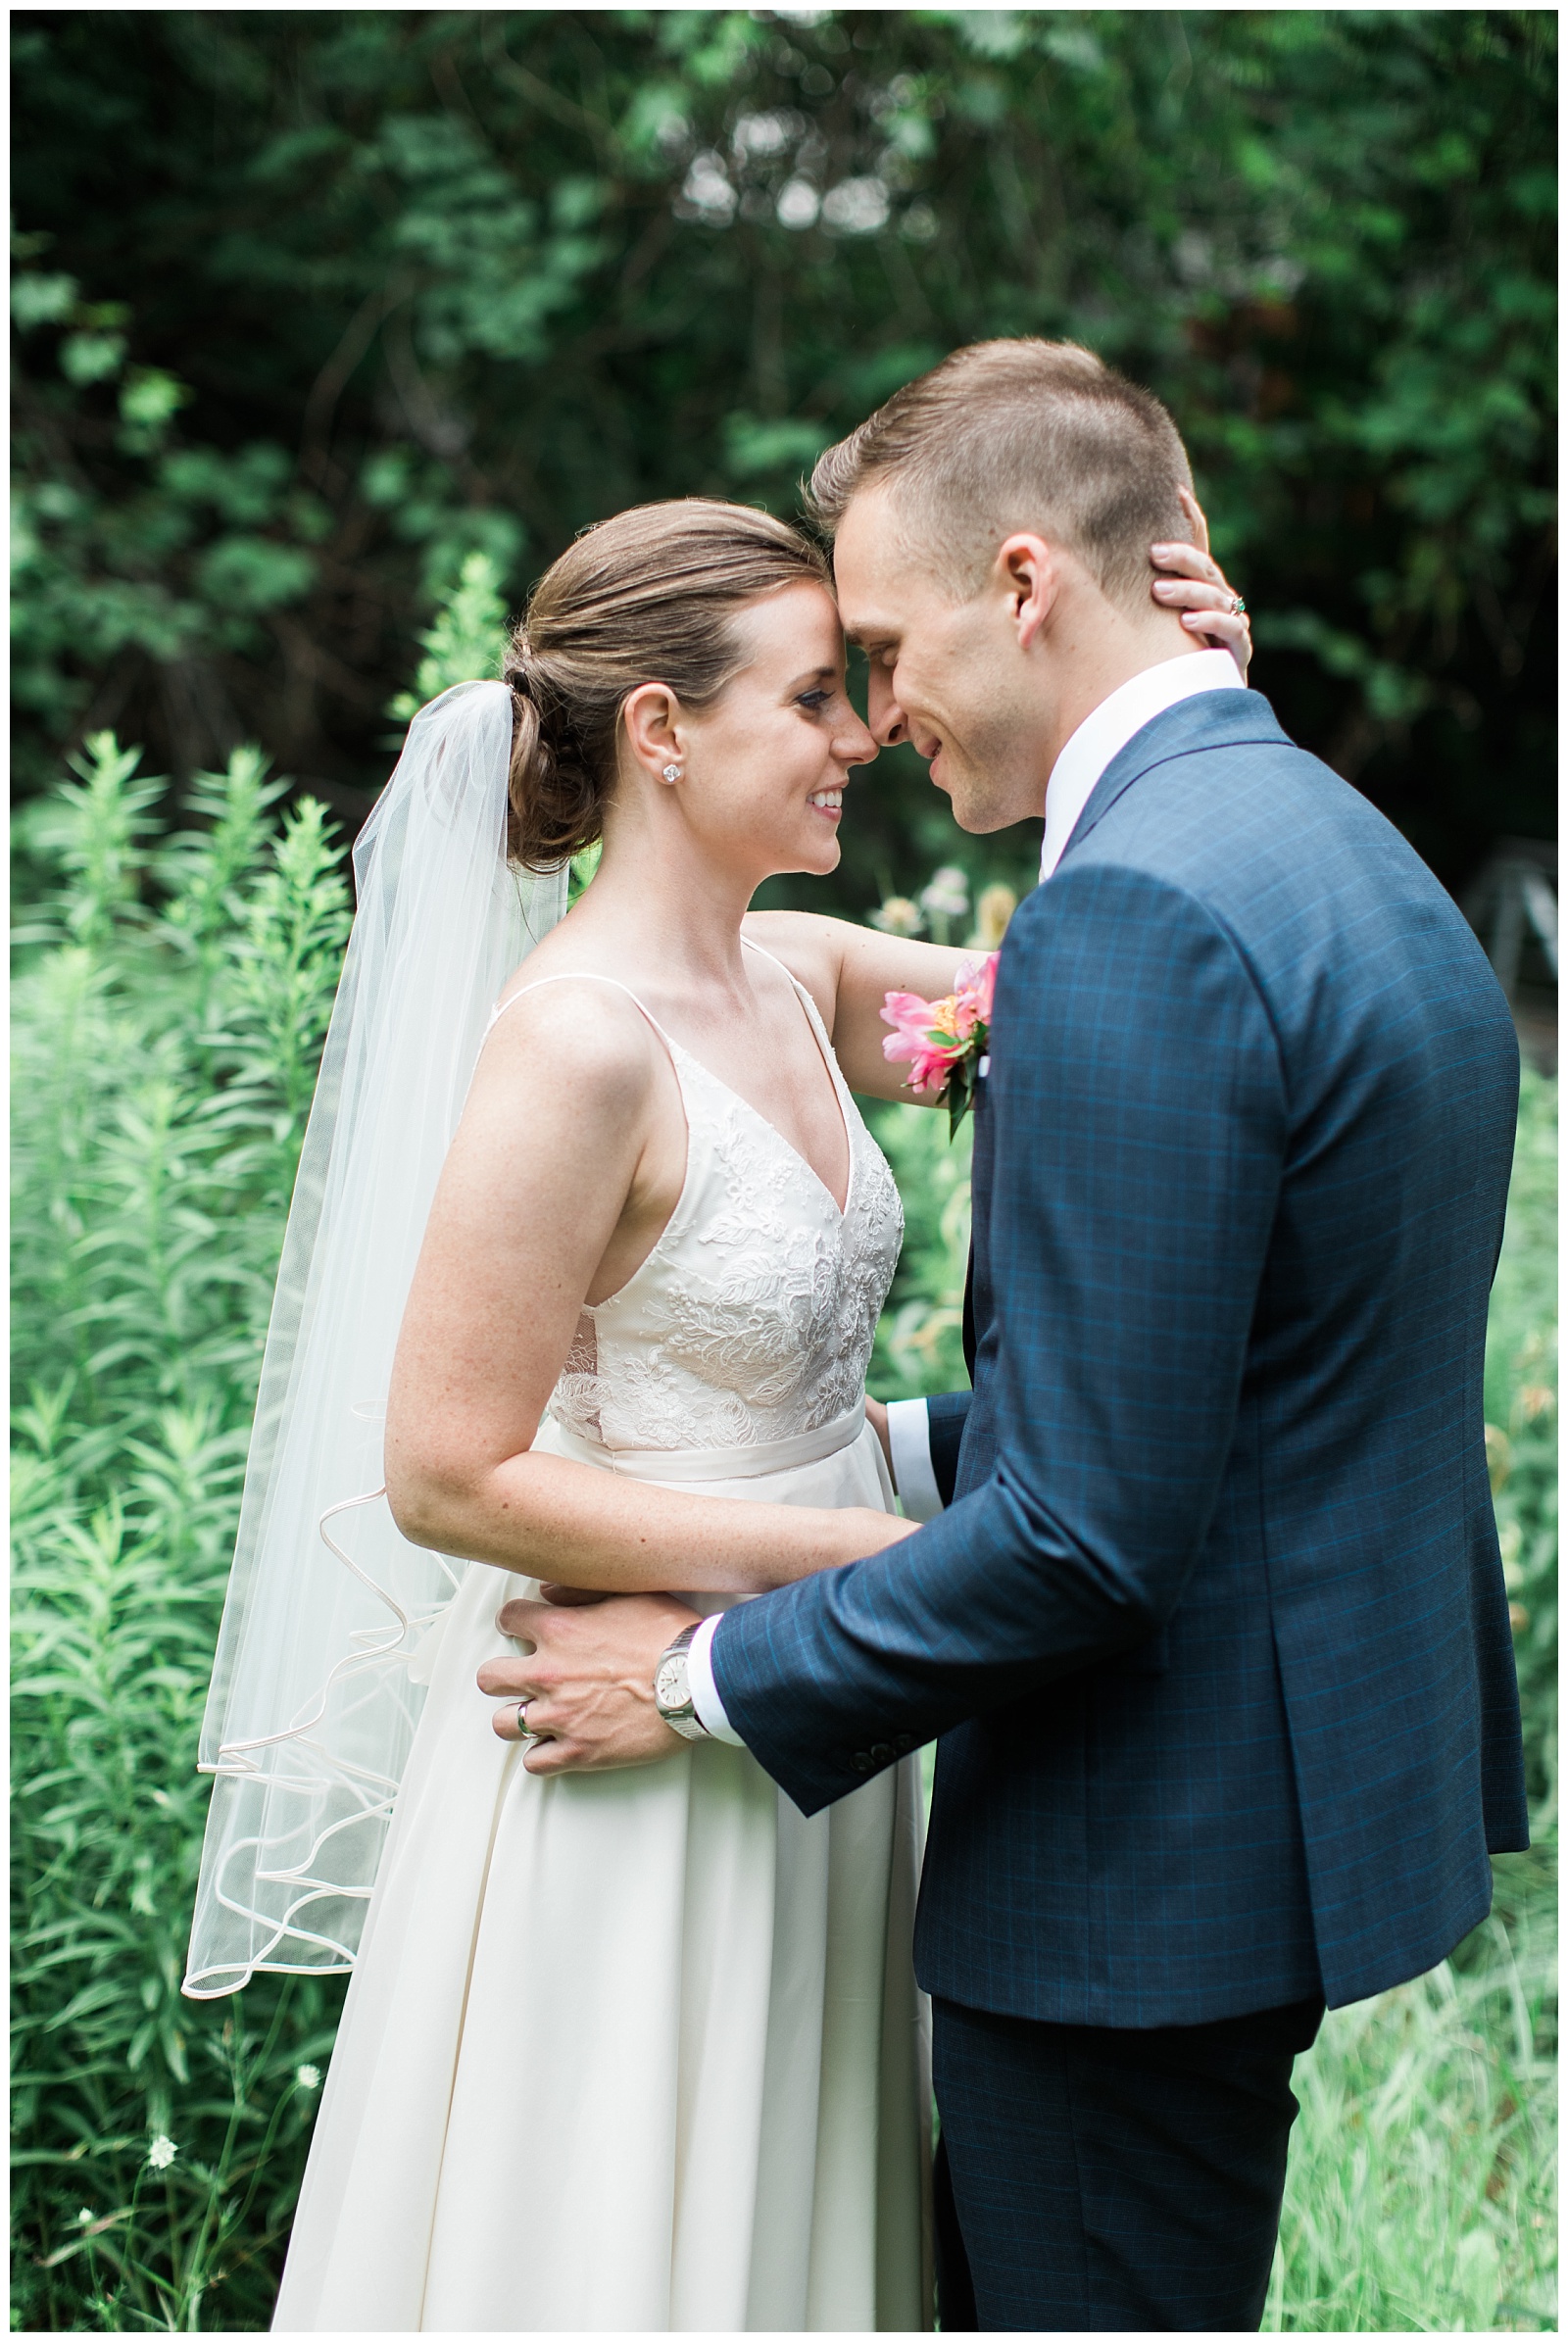 Bride and Groom touching noses in embrace with greenery backdrop at Guelph Ontario Wedding | Ontario Wedding Photographer | Toronto Wedding Photographer | 3photography